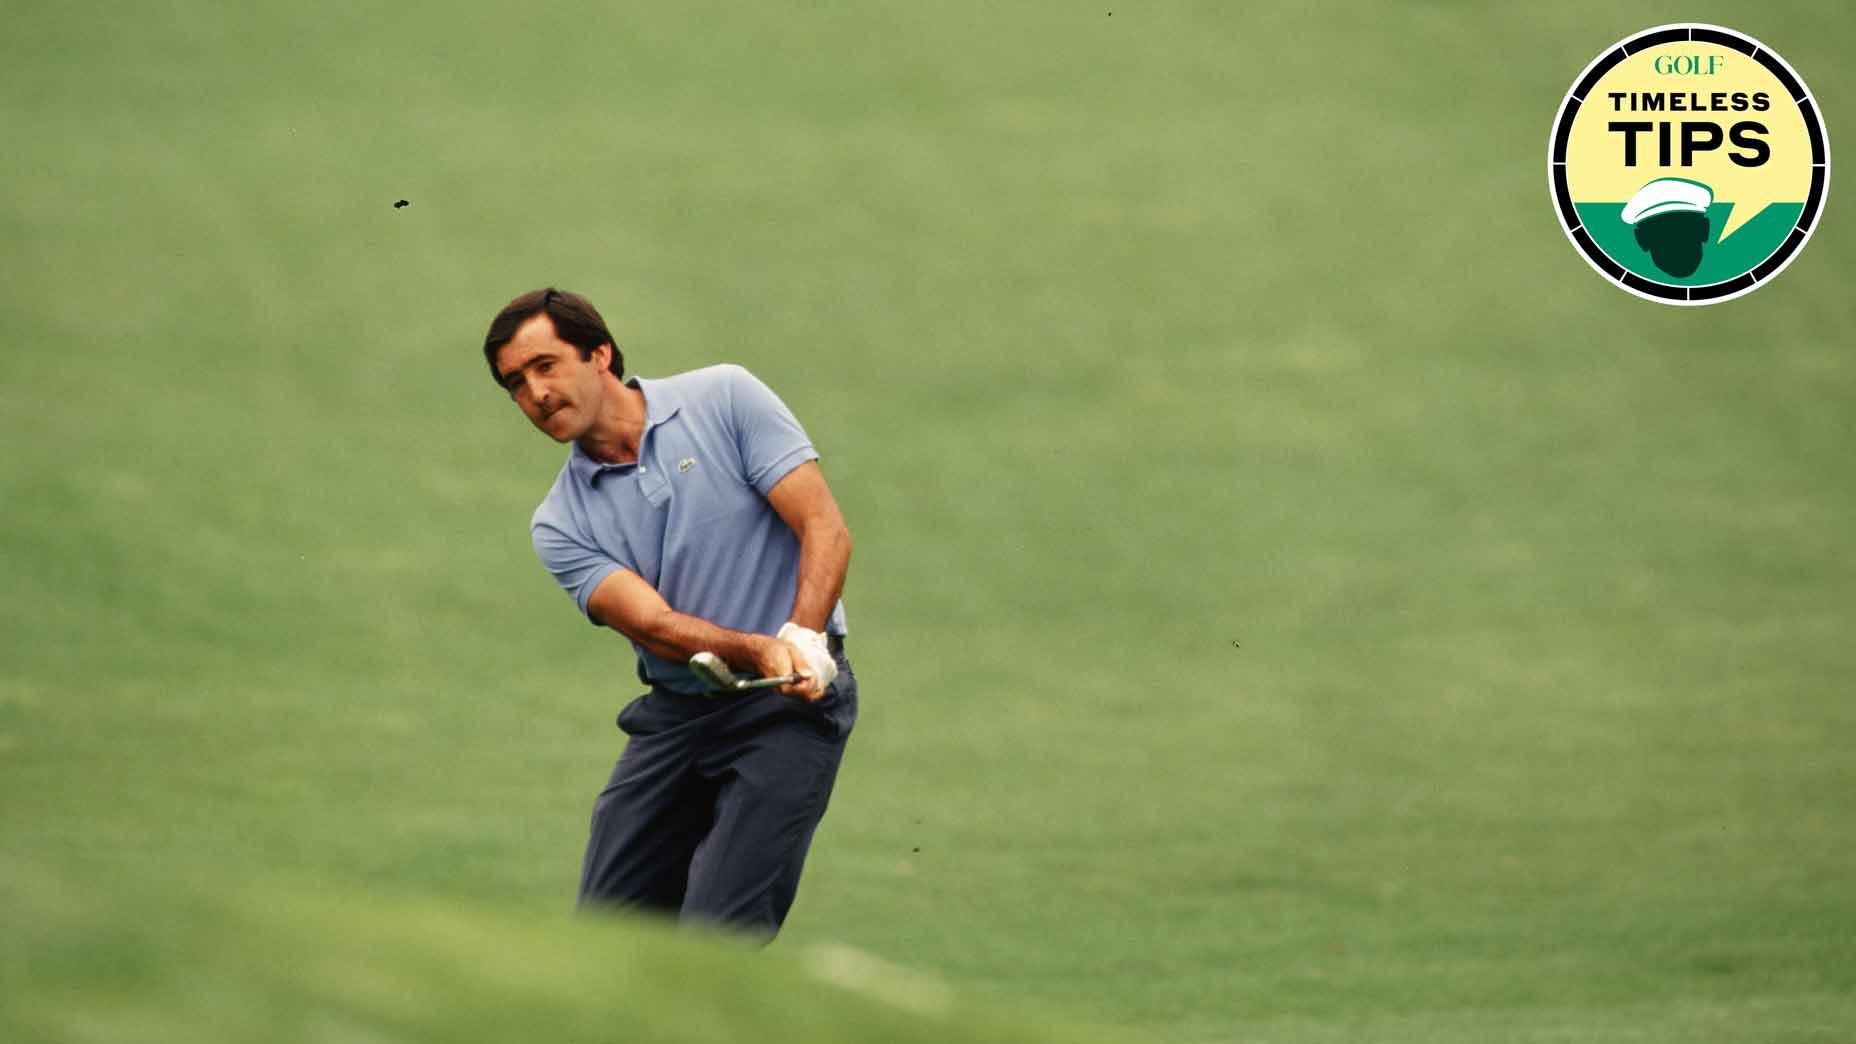 seve ballesteros hits a pitch shot during the 1989 masters